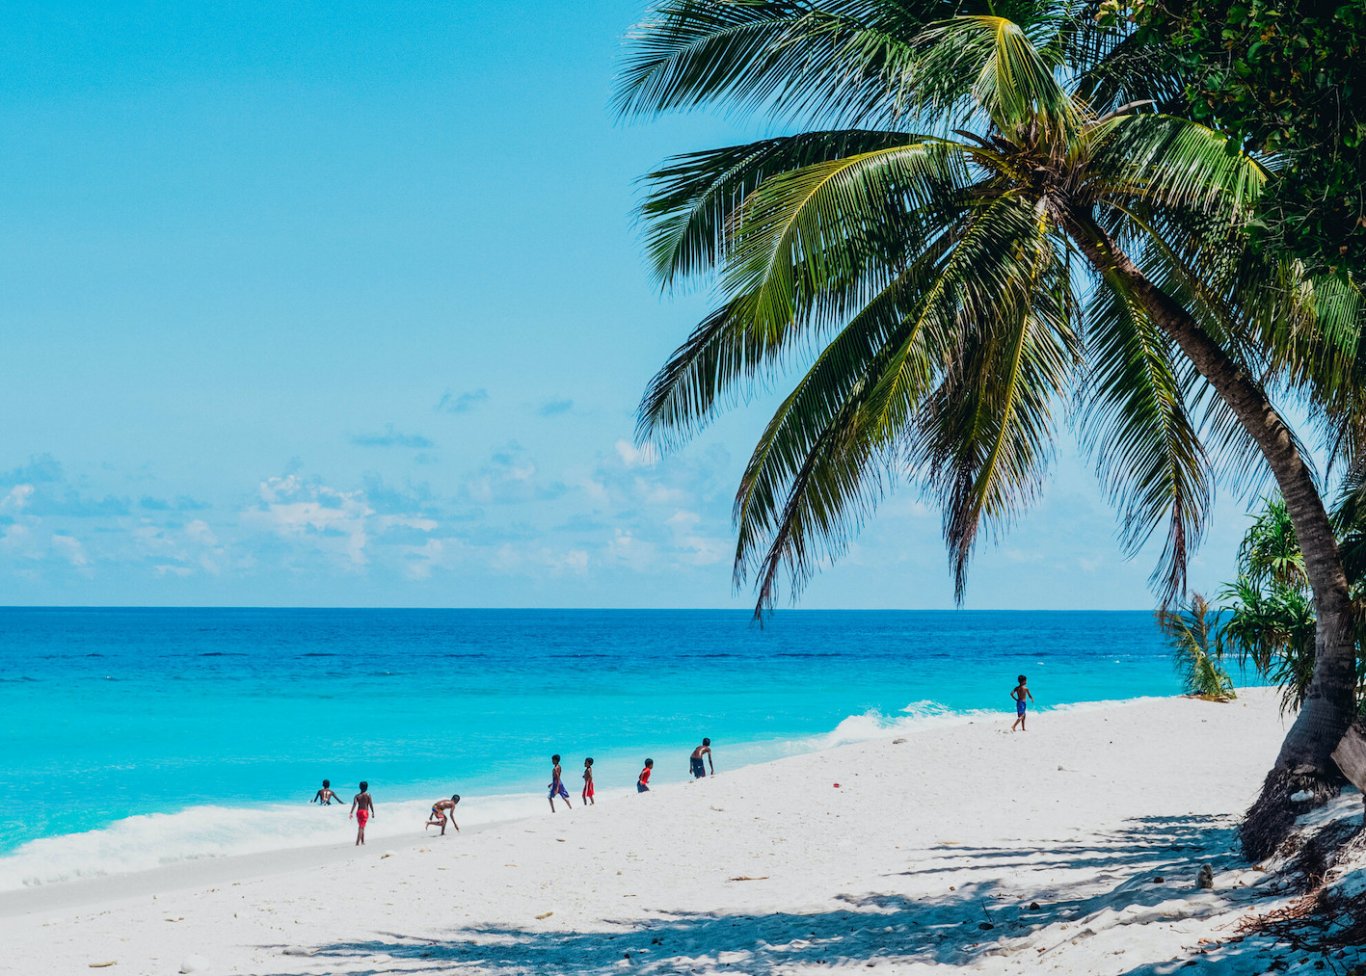 A shot of a beach in the Maldives showing the white sand, bright blue clear sea and a palm tree